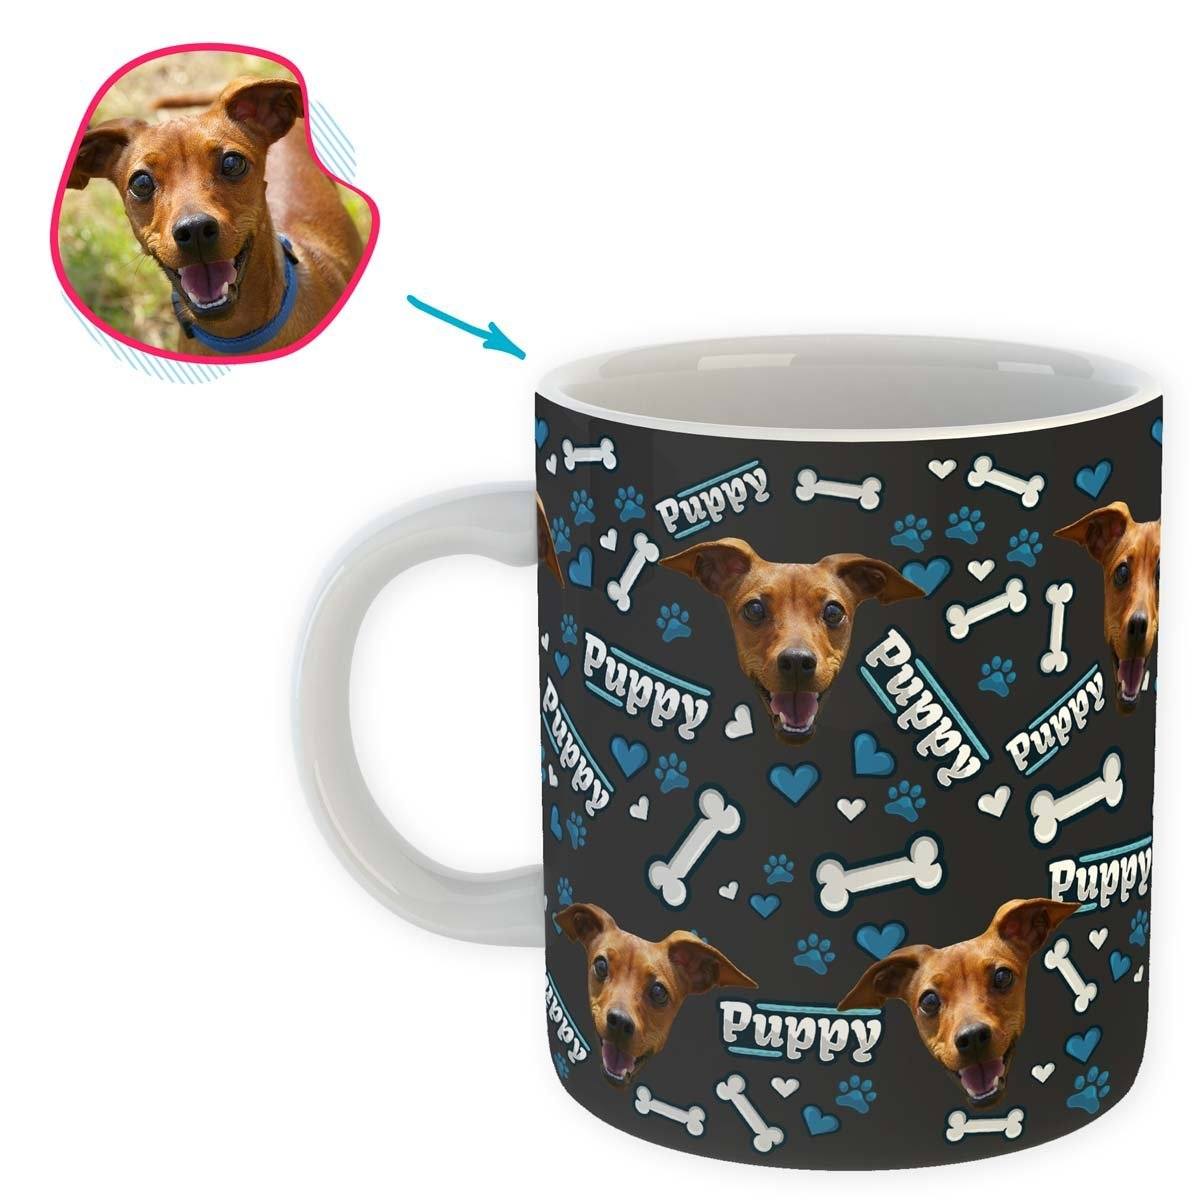 dark Puppy mug personalized with photo of face printed on it